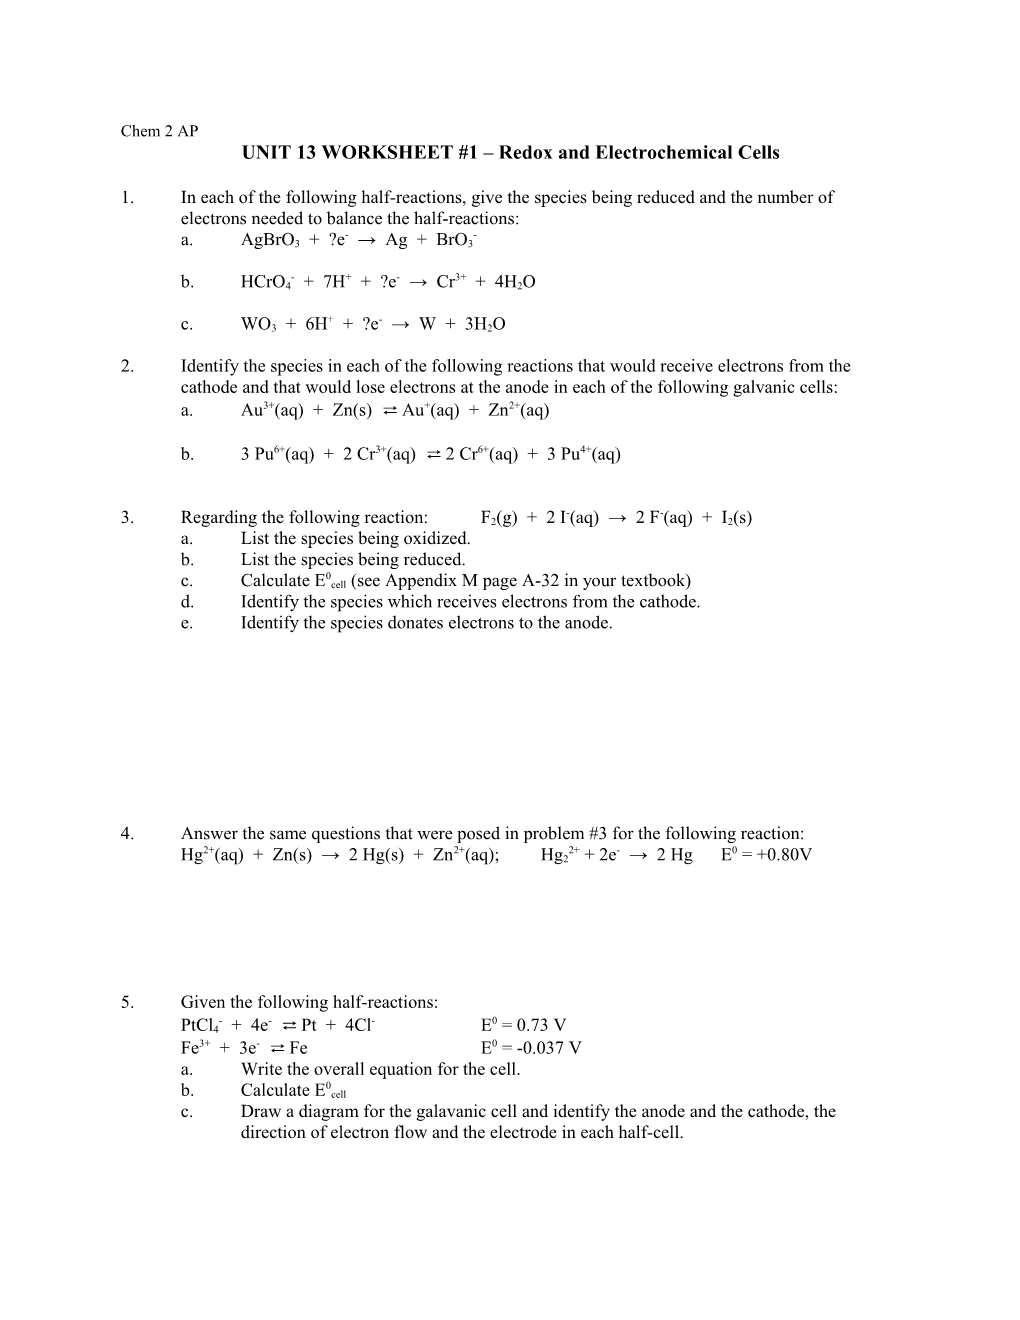 UNIT 13 WORKSHEET #1 Redox and Electrochemical Cells